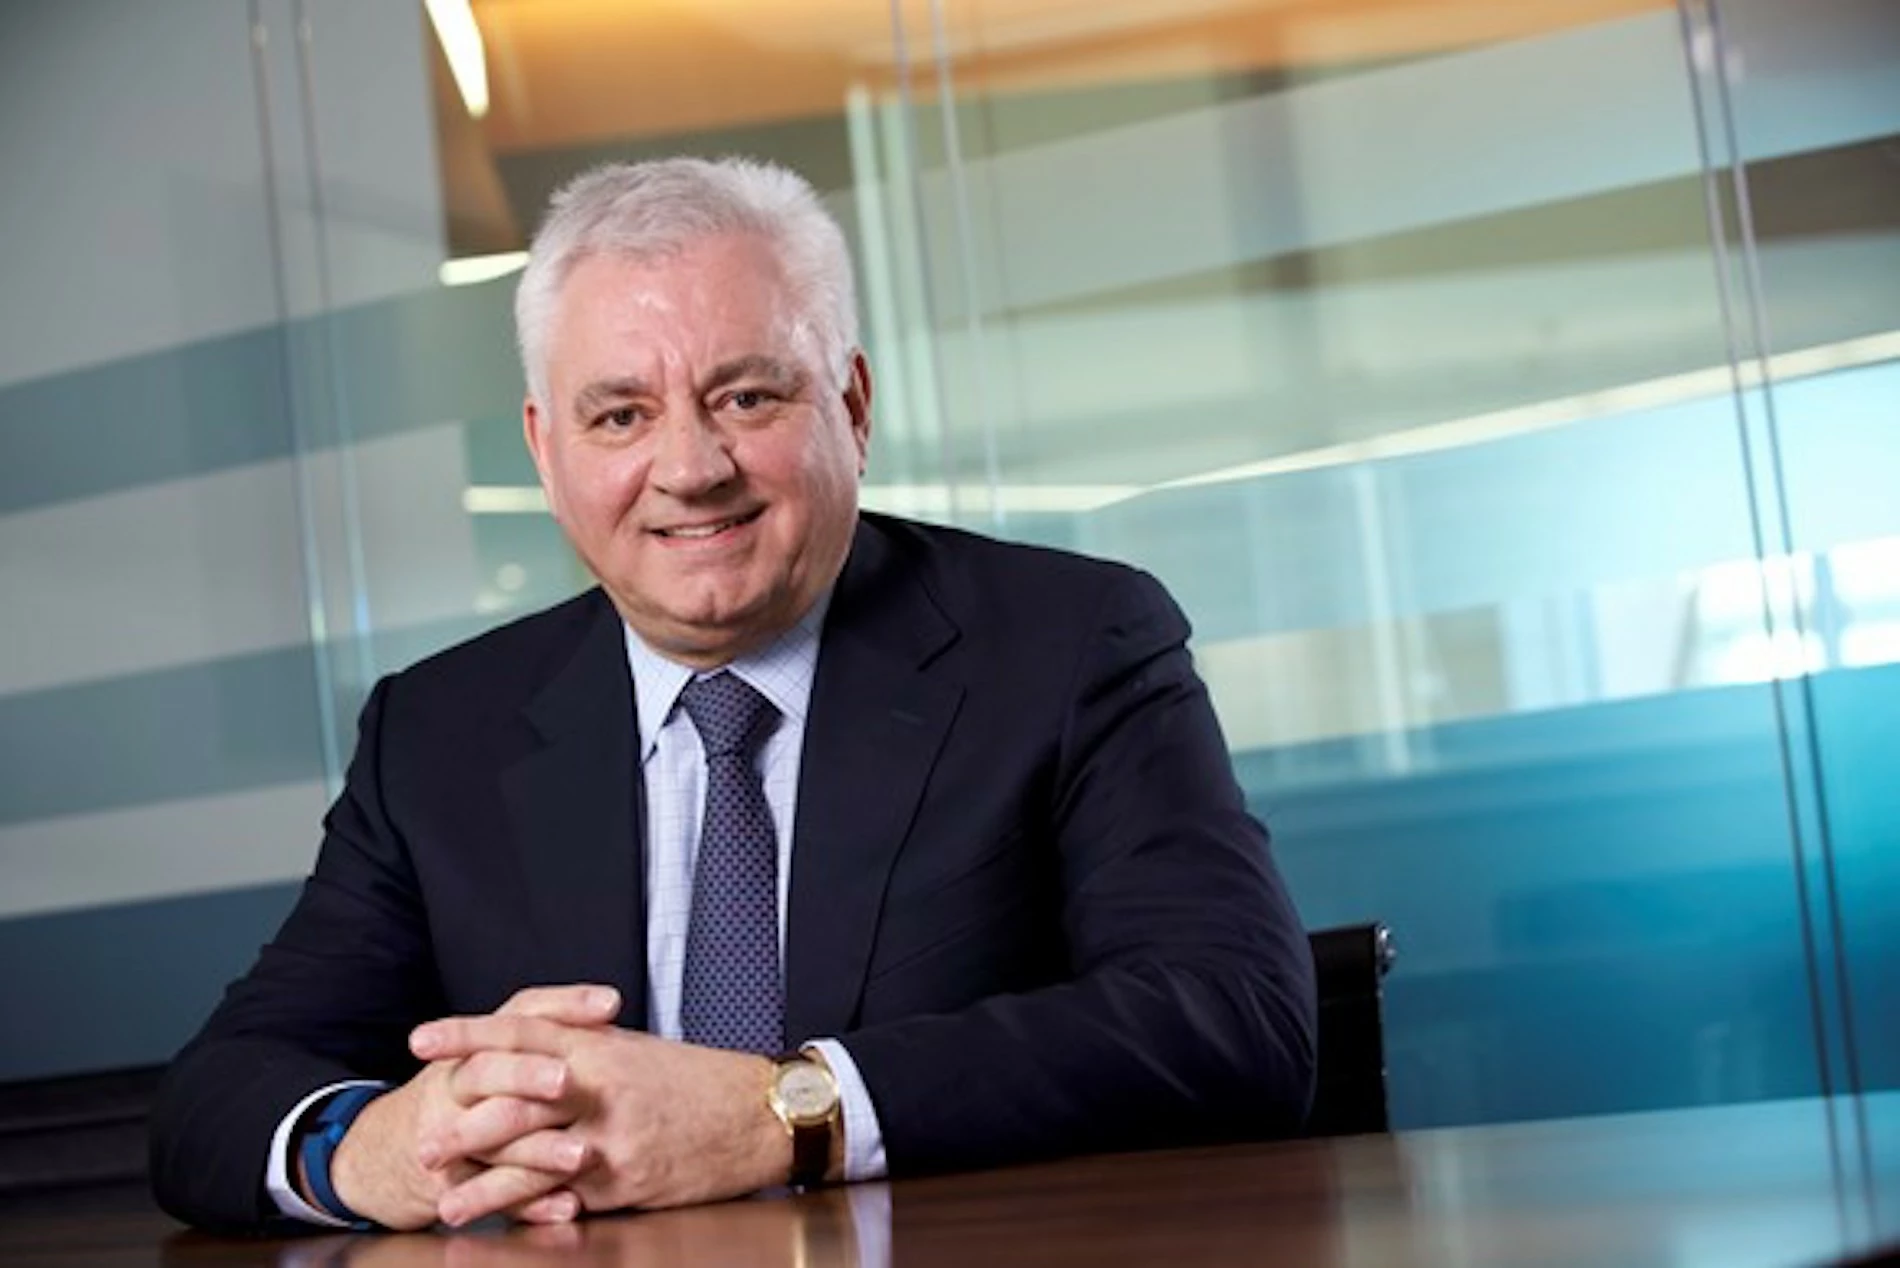 Sir Nigel Knowles, chairman of the SCR’s Local Enterprise Board